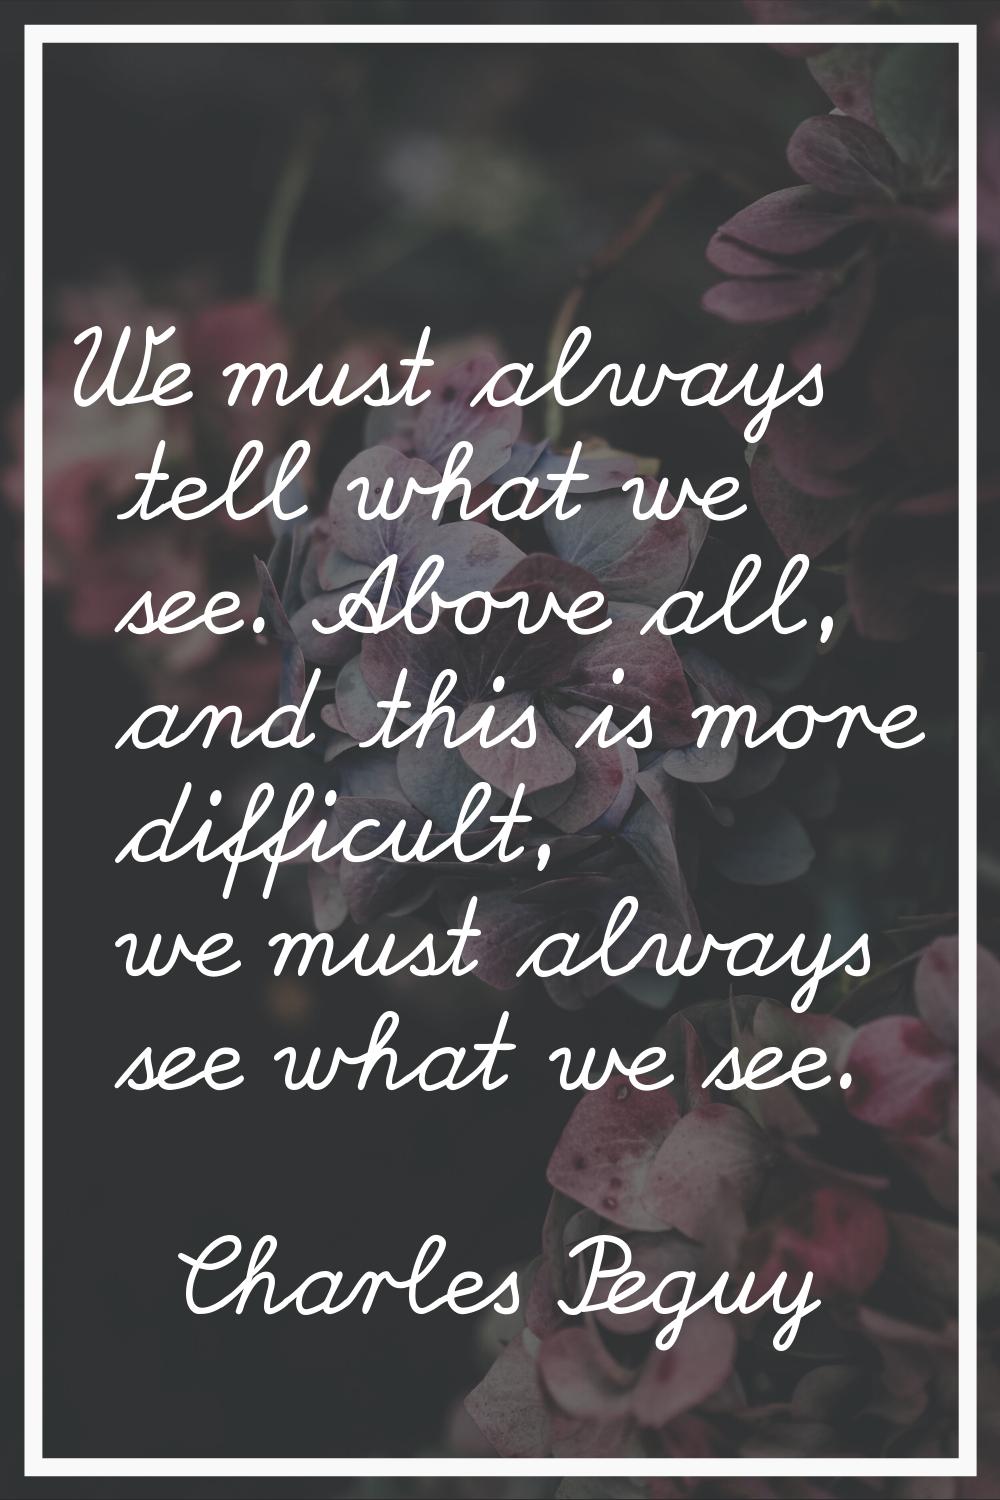 We must always tell what we see. Above all, and this is more difficult, we must always see what we 